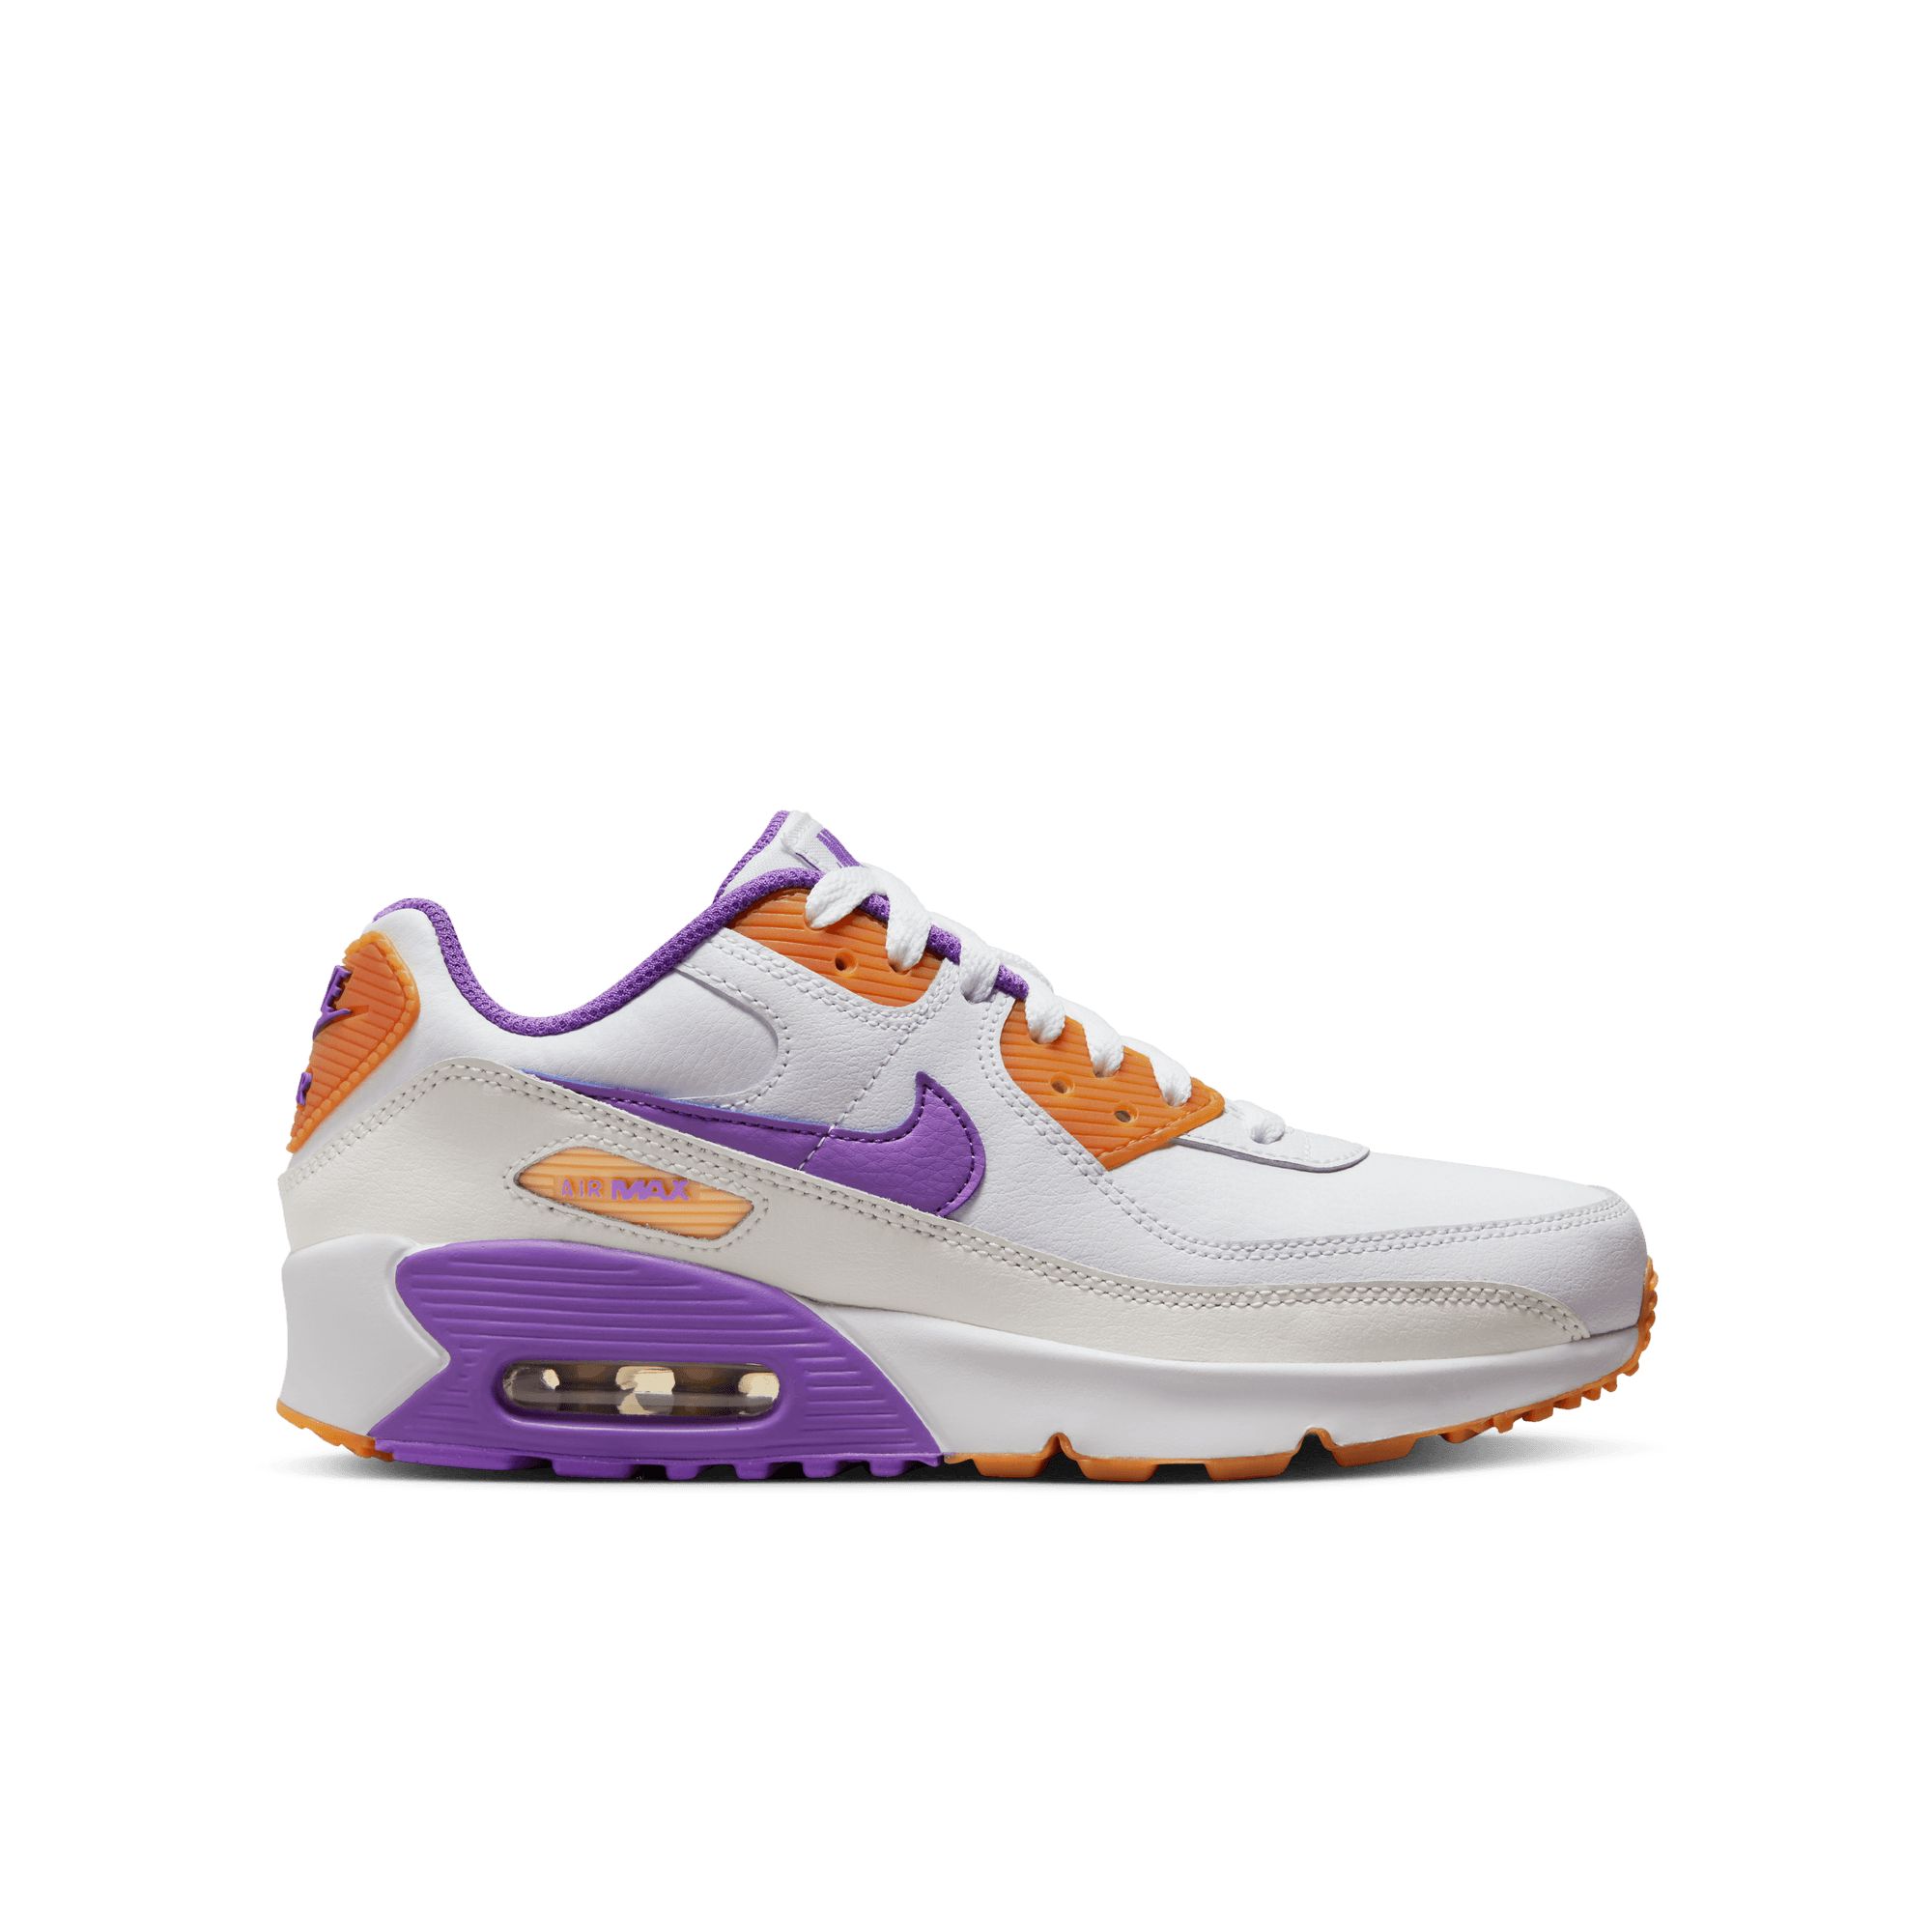 Image of Nike Girls' Grade School Air Max LTR Shoes